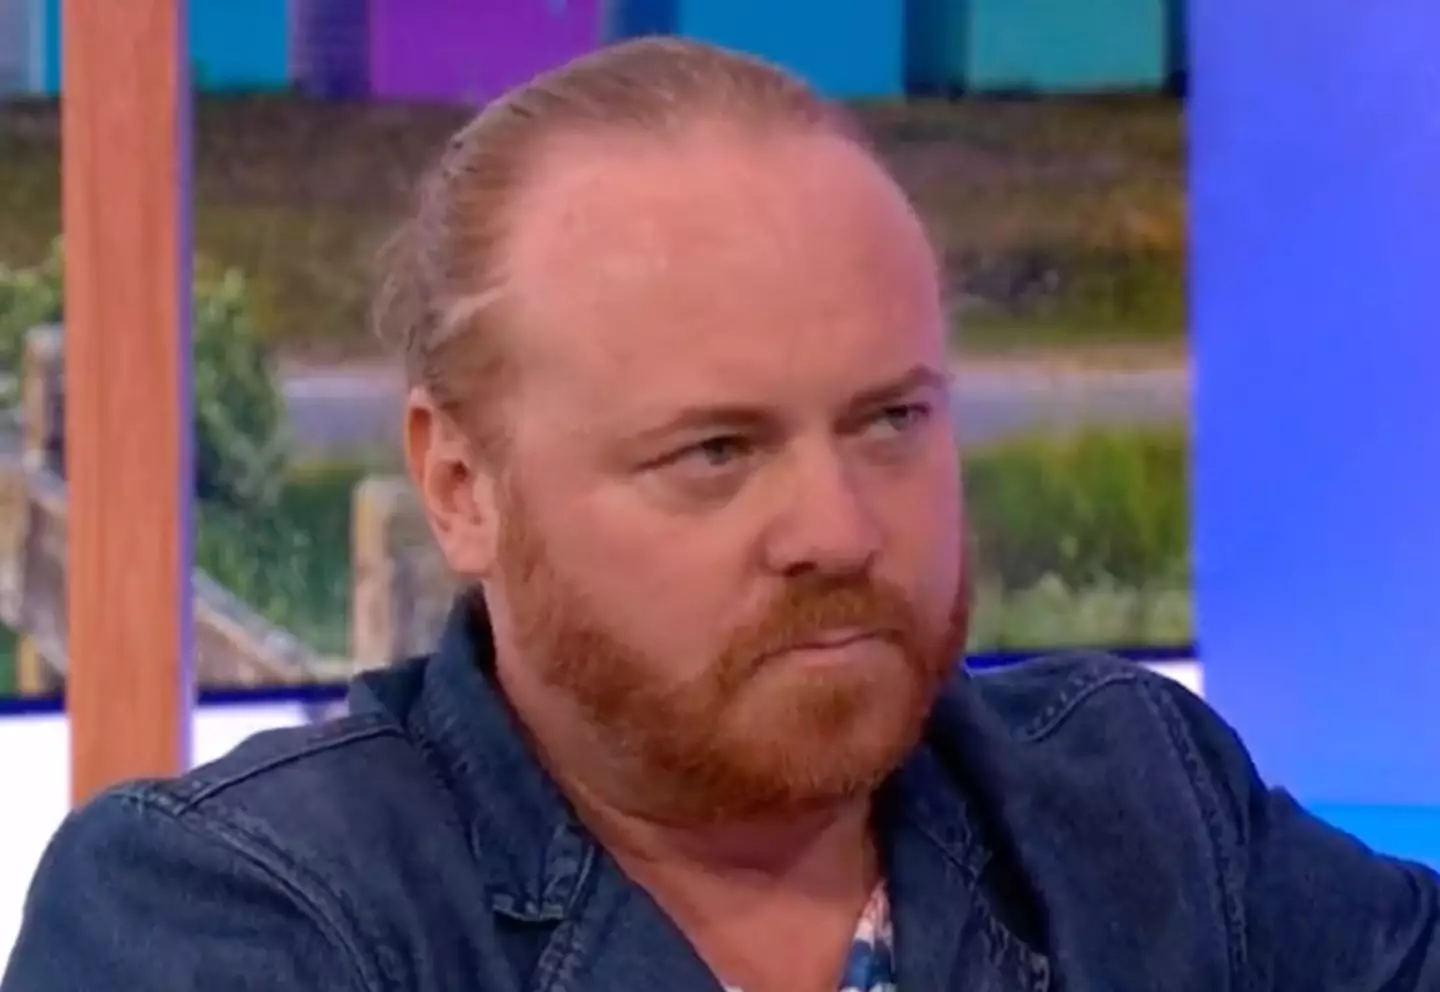 Leigh Francis admitted it was 'weird' to interview as himself.